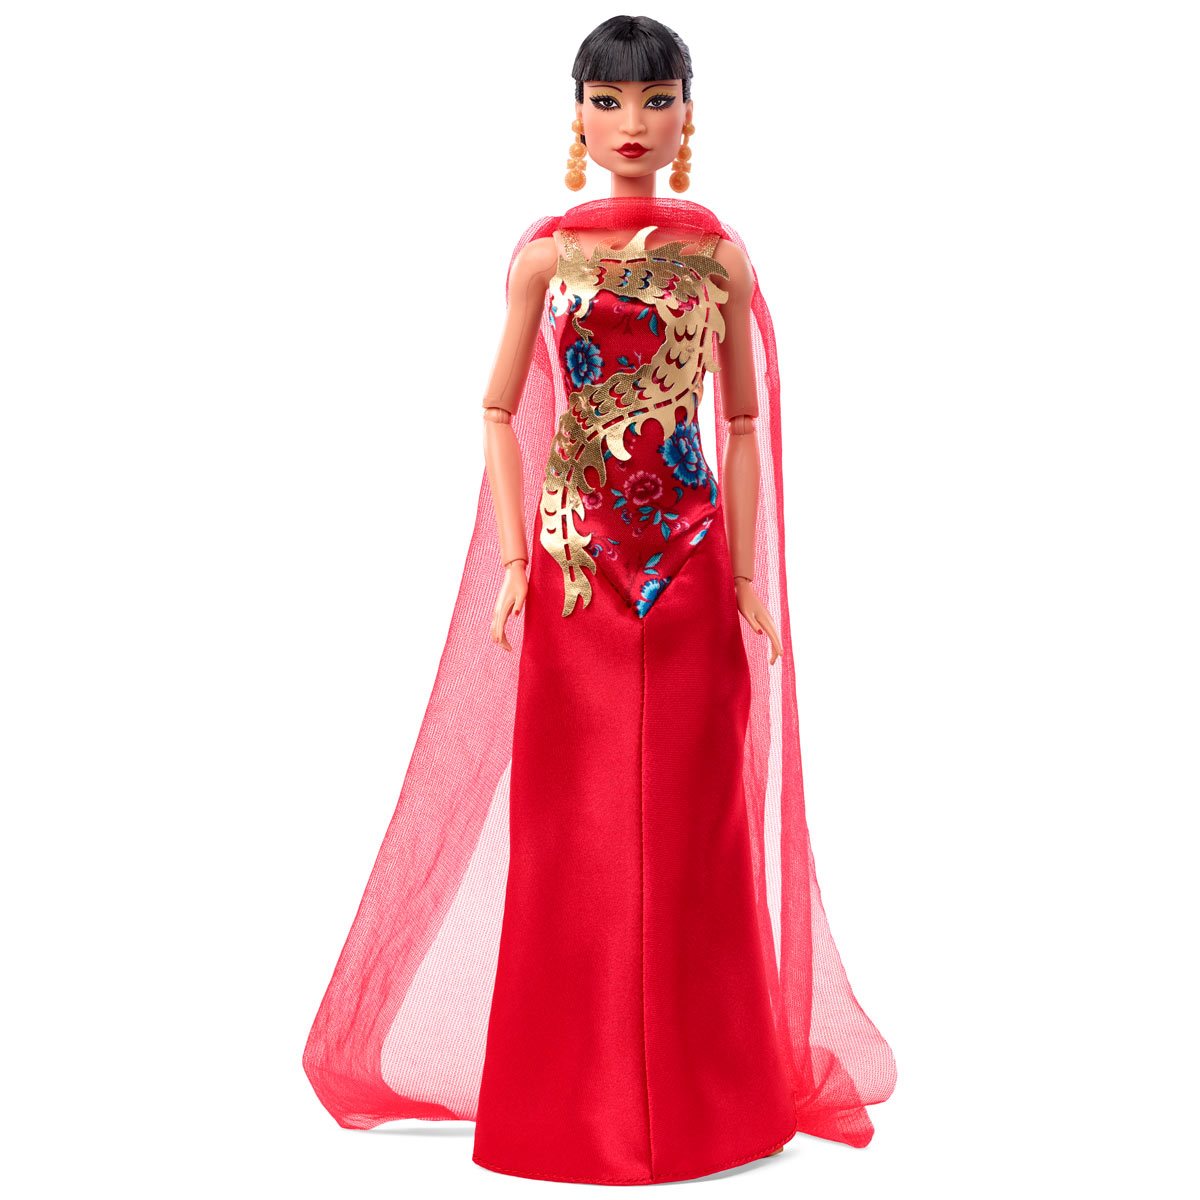 Barbie Signature Collection Women Who Inspire Anna May Wong